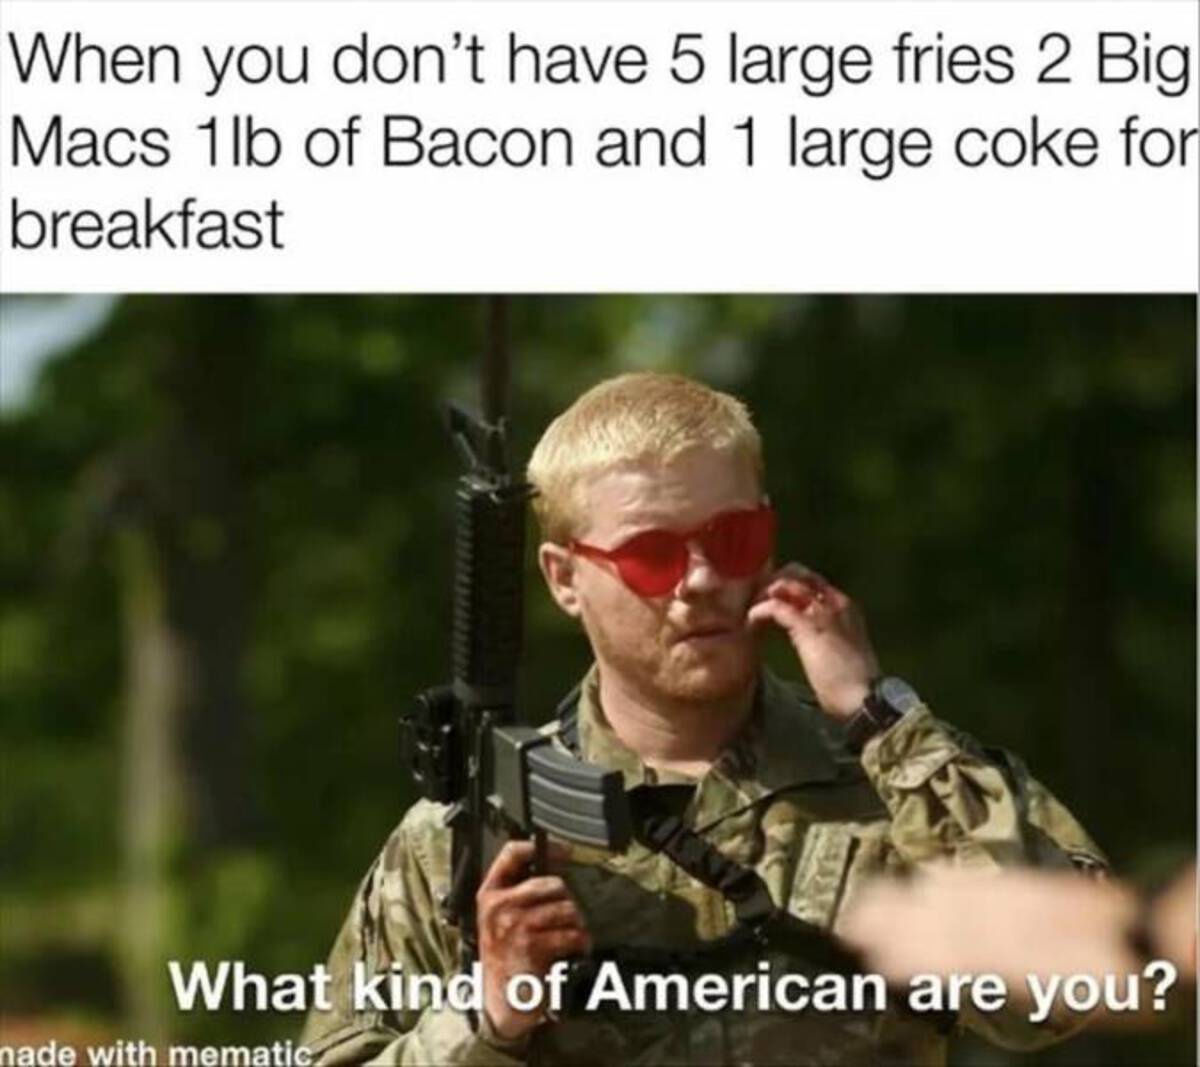 civil war 2024 jesse plemons - When you don't have 5 large fries 2 Big Macs 1lb of Bacon and 1 large coke for breakfast What kind of American are you? made with mematic